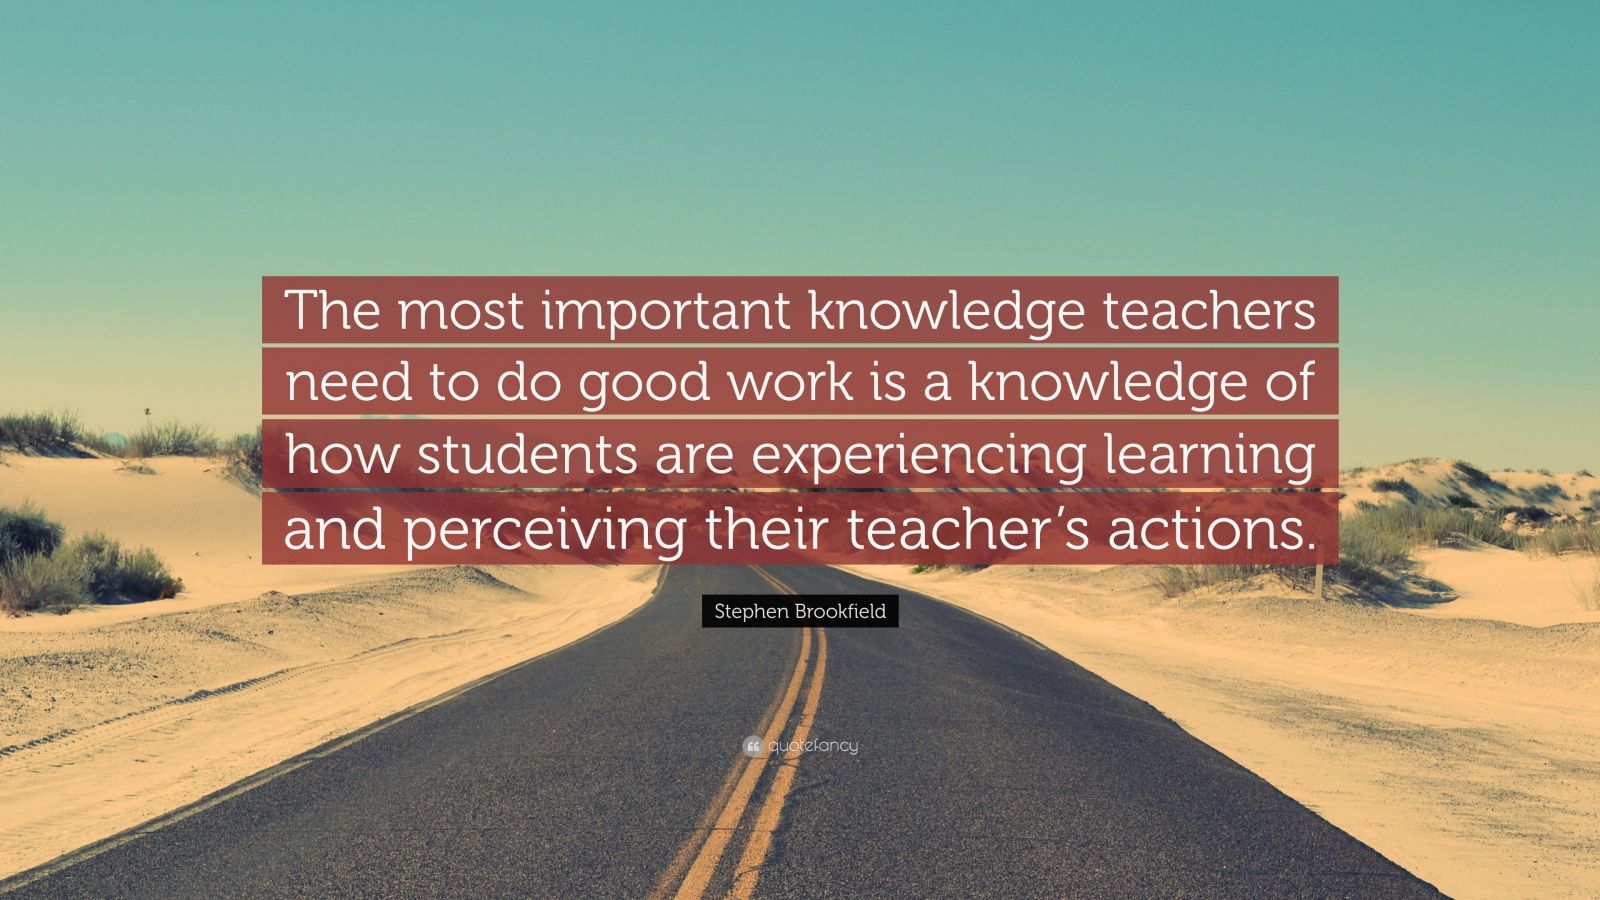 Stephen Brookfield Quote: “The most important knowledge teachers need